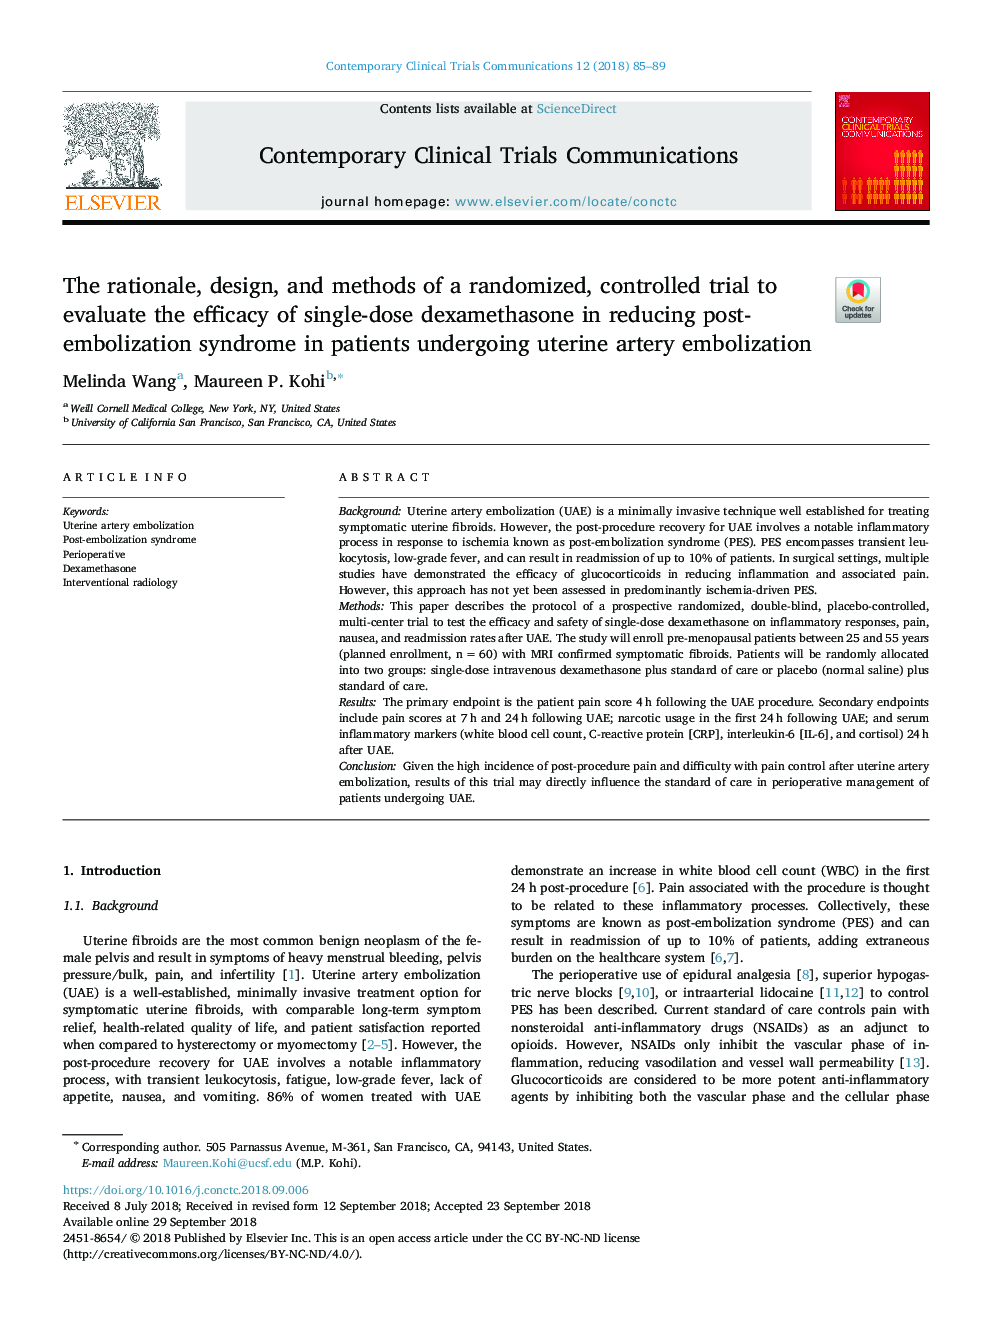 The rationale, design, and methods of a randomized, controlled trial to evaluate the efficacy of single-dose dexamethasone in reducing post-embolization syndrome in patients undergoing uterine artery embolization